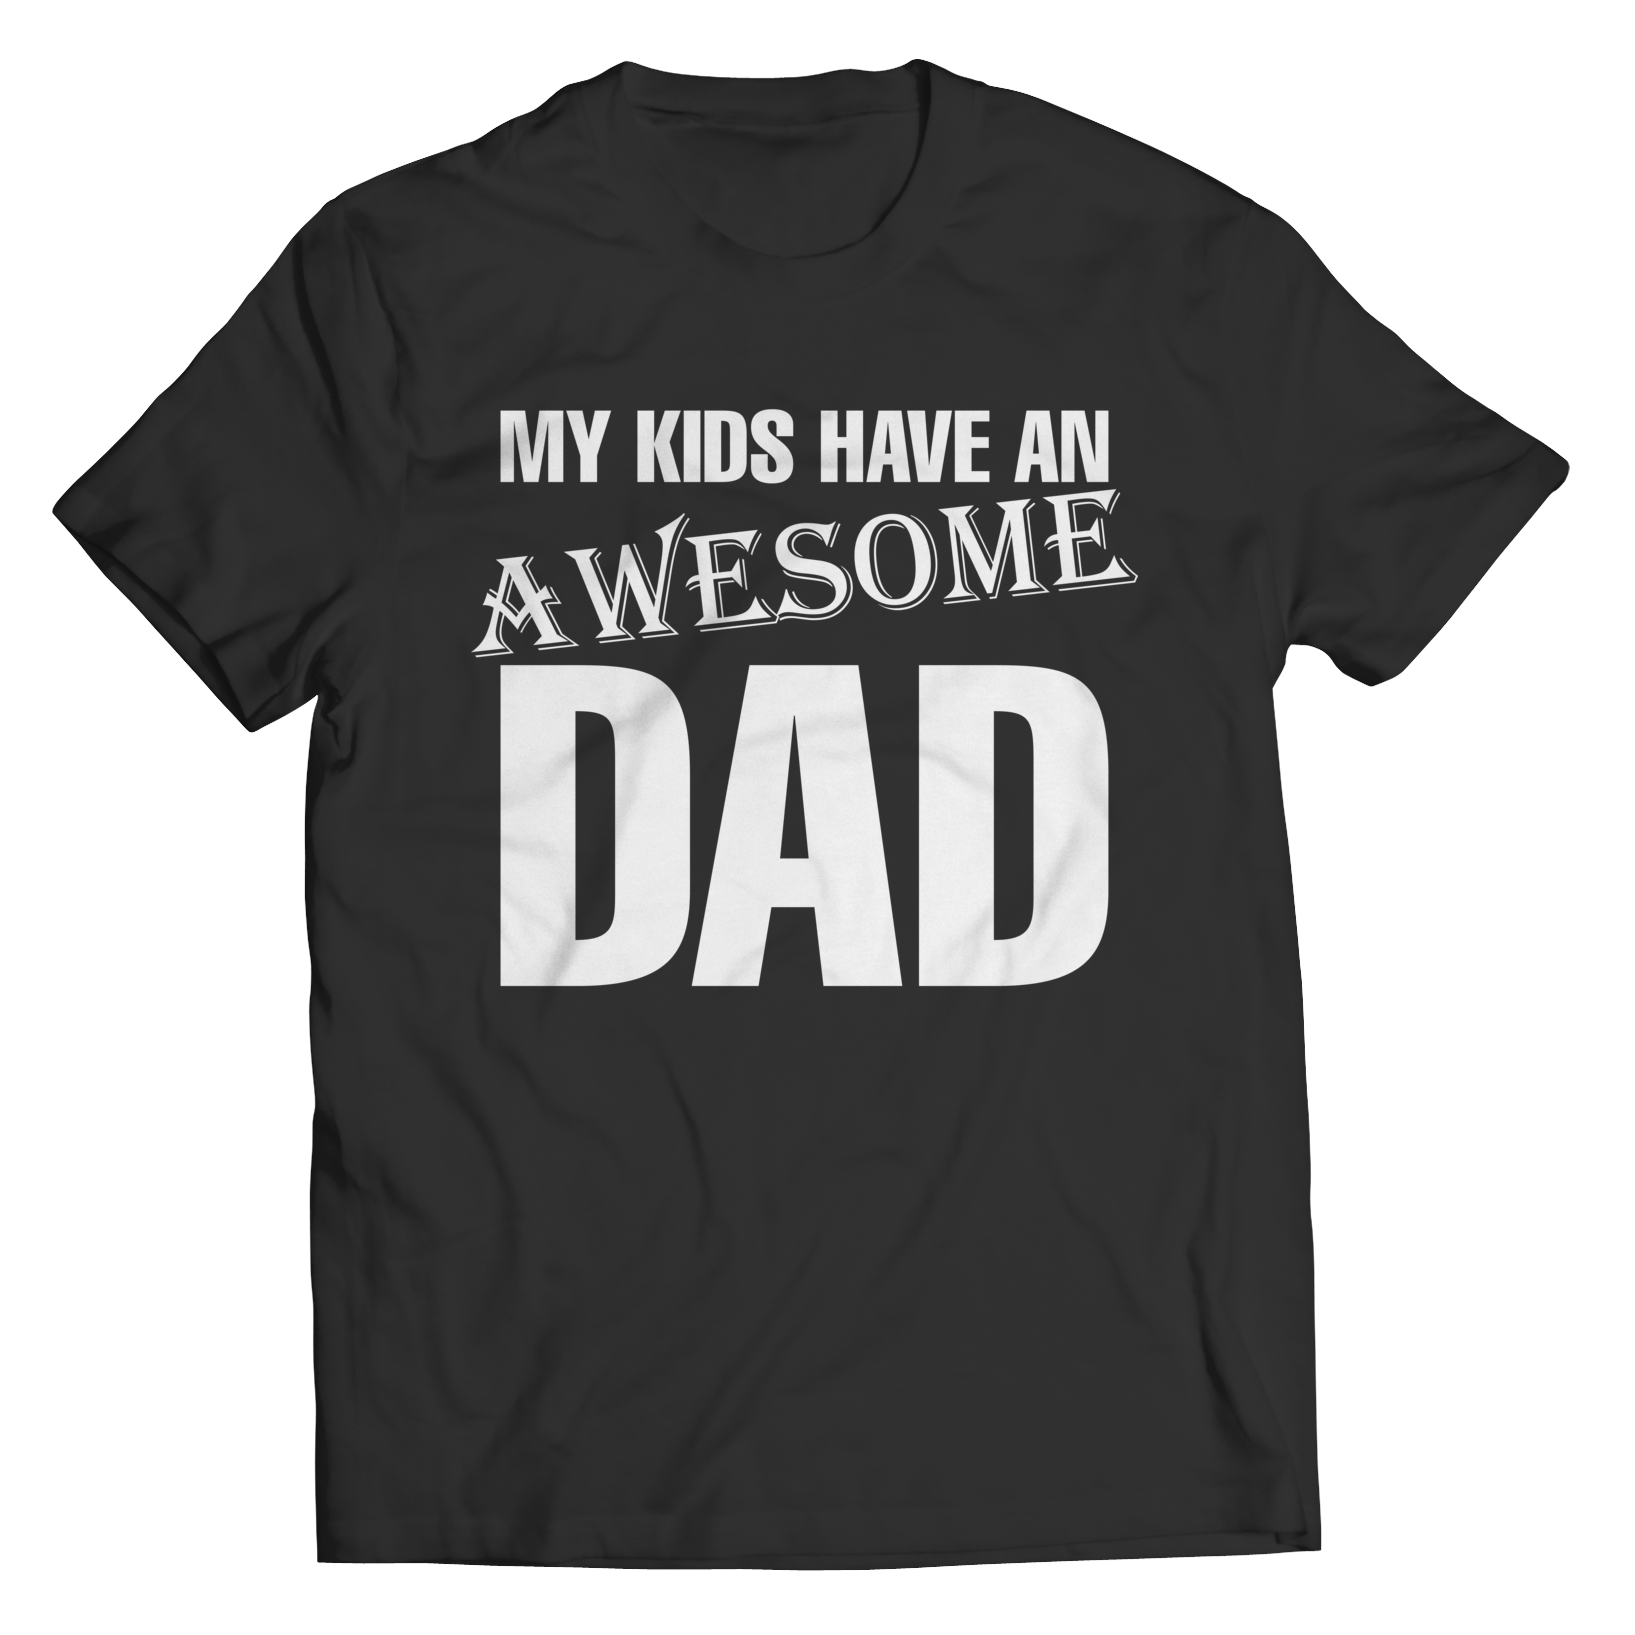 My Kids Have an Awesome Dad Shirt